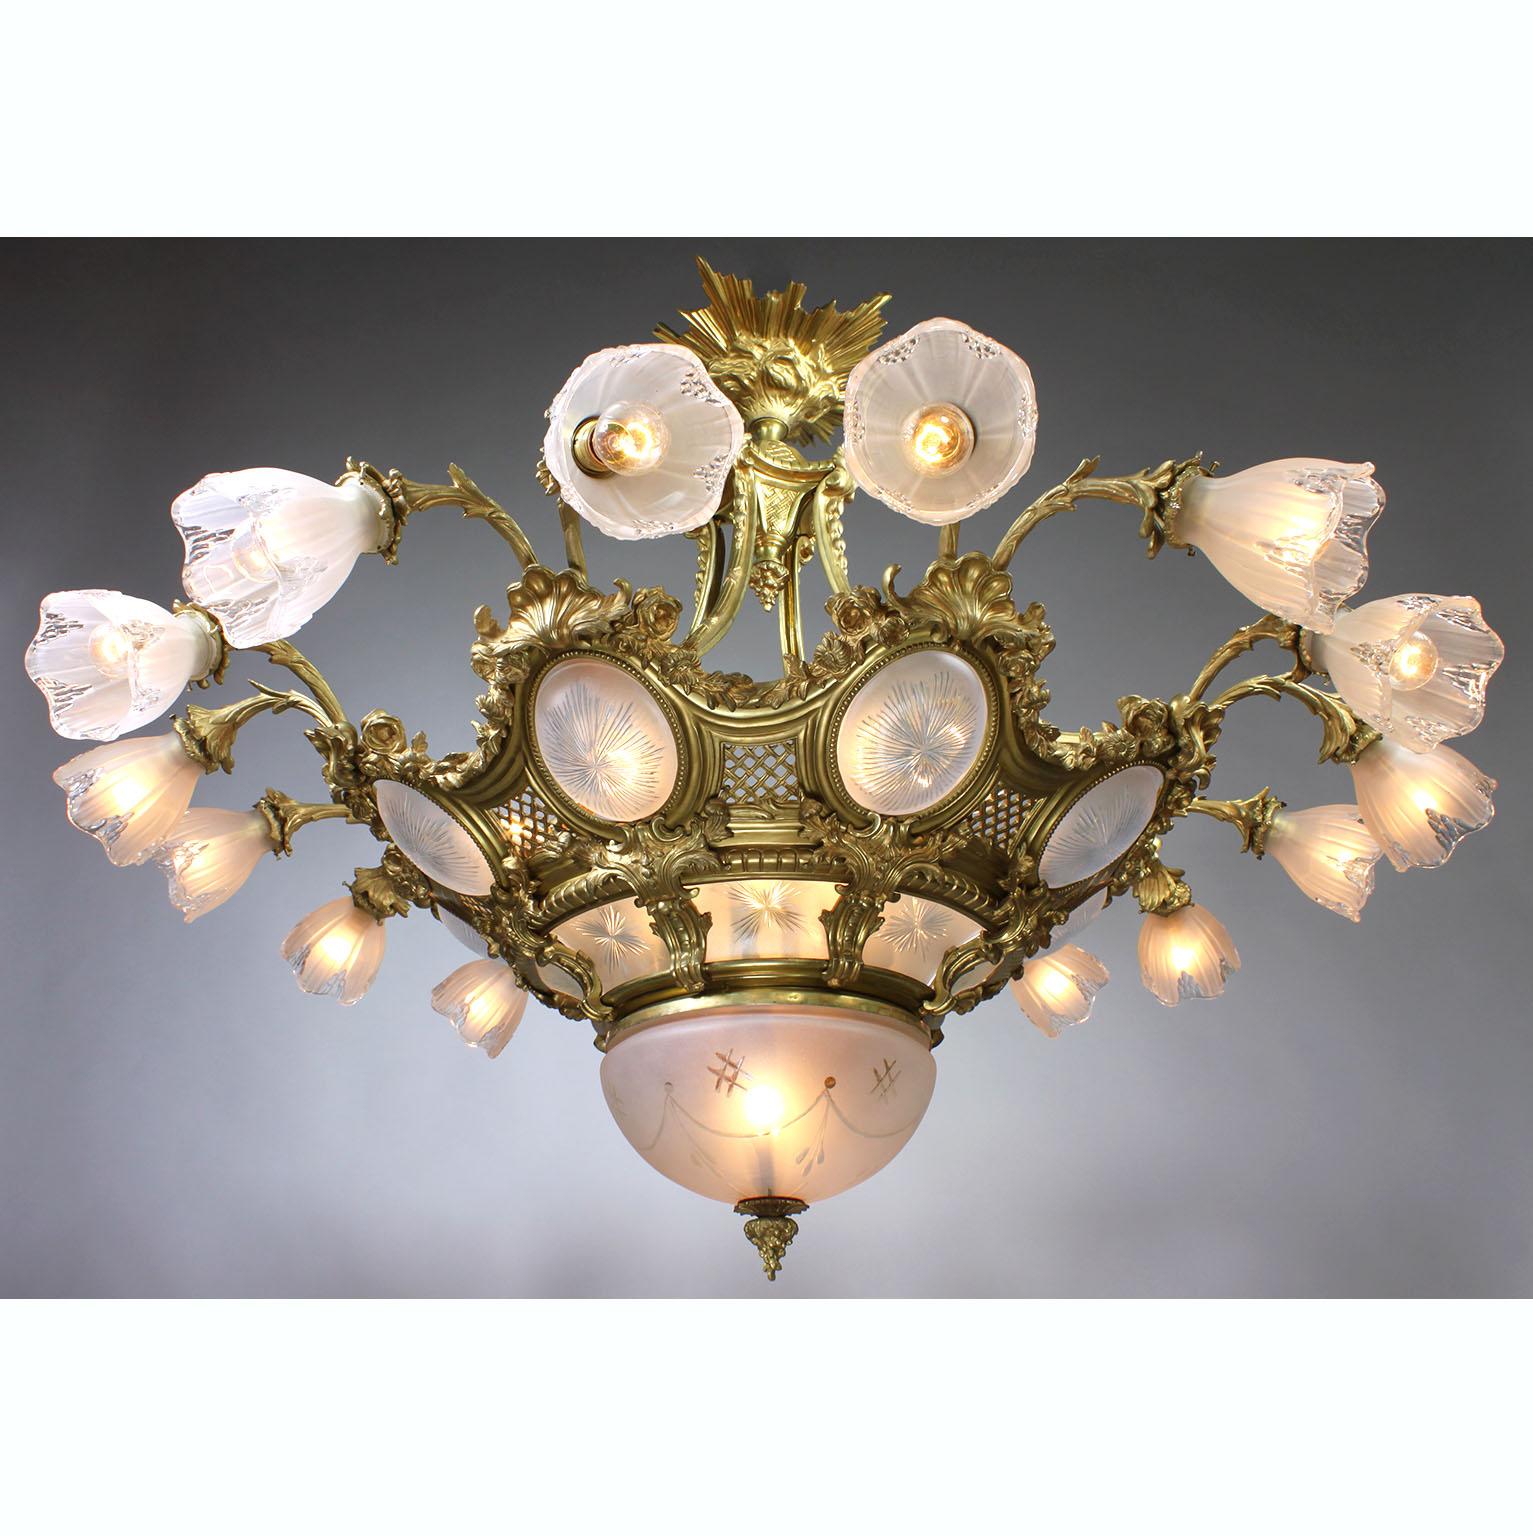 A large and impressive French Belle Époque gilt-bronze and molded glass sixteen-light plafonnier chandelier. The large ovoid pierced gilt-bronze frame surmounted with eight pairs of floral scrolled light-branches, each fitted with a frosted molded